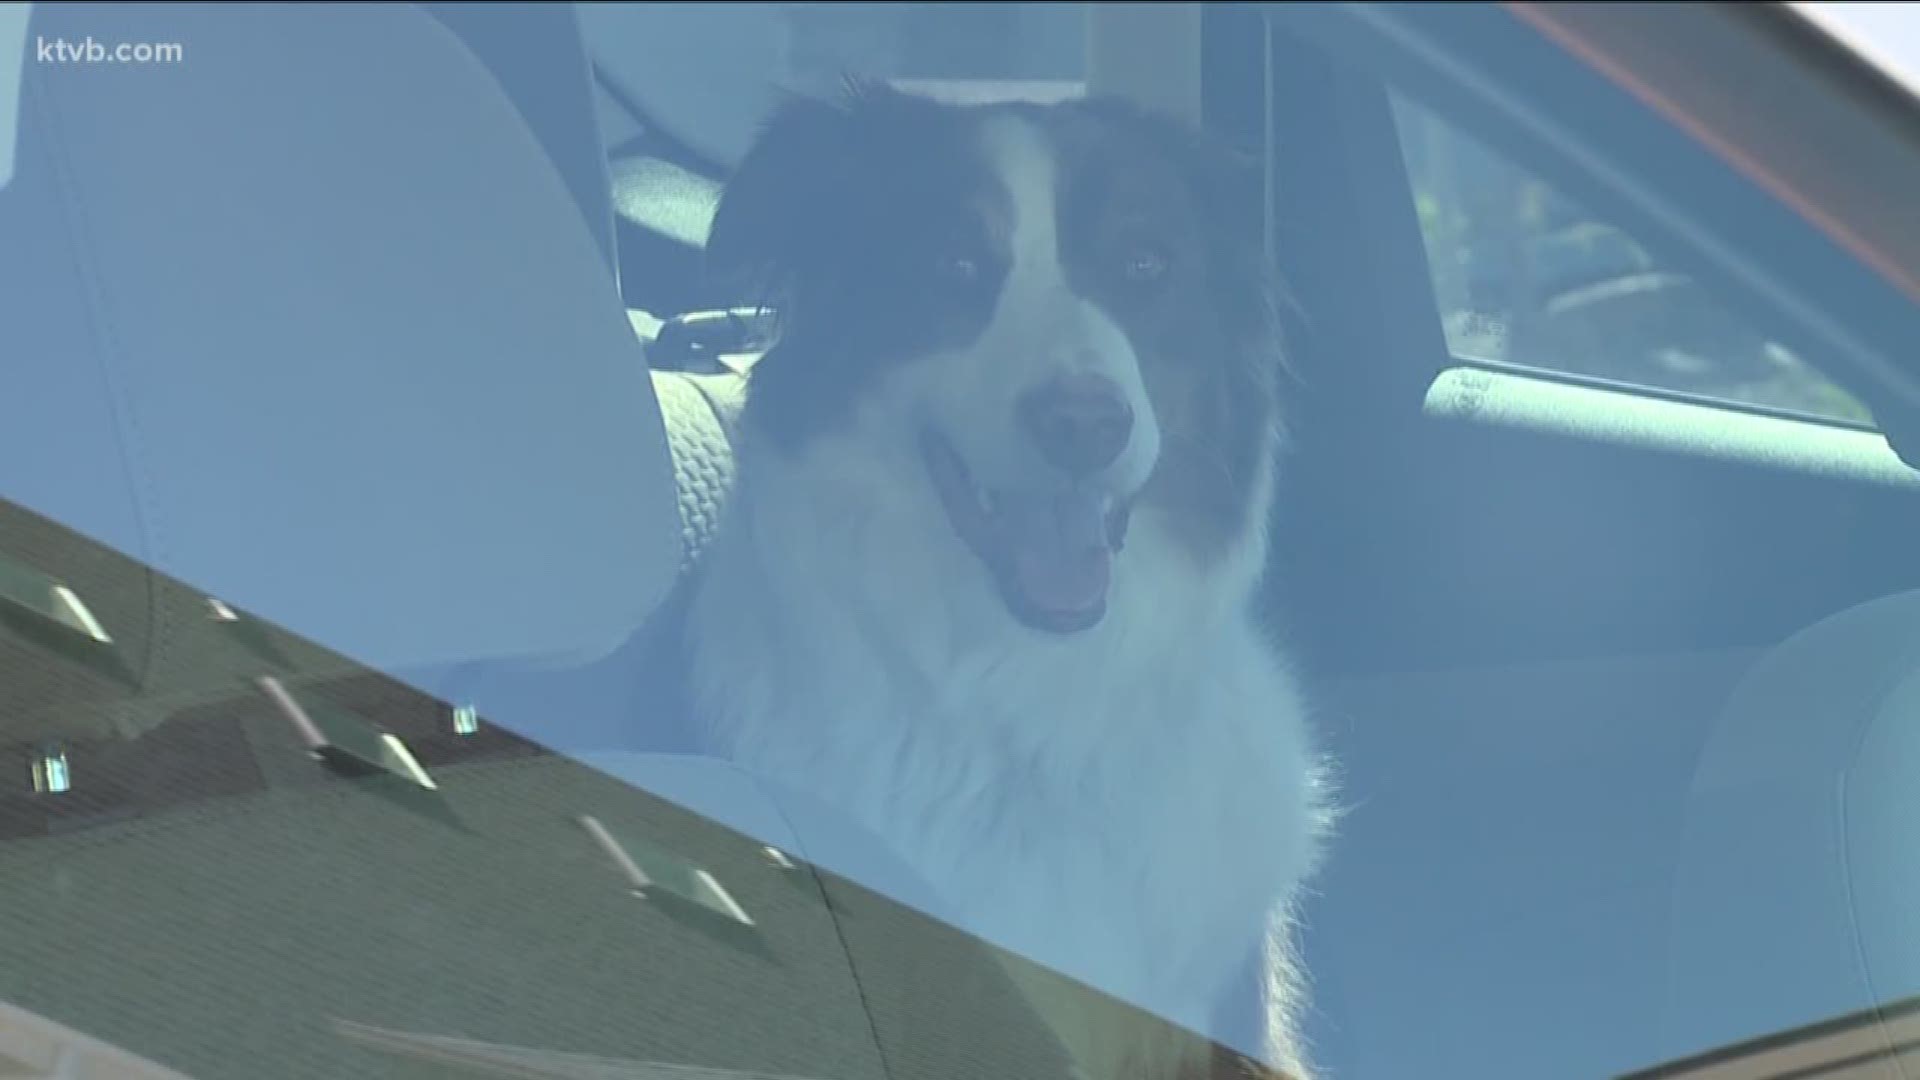 Efforts are underway to update Boise's animal cruelty laws, which would allow citizens to break car windows to get animals out of hot cars and effectively ban circuses that include exotic animals. Boise City Councilman TJ Thomson says the city's code surrounding animal abuse hasn't been updated in decades and needs to be updated.